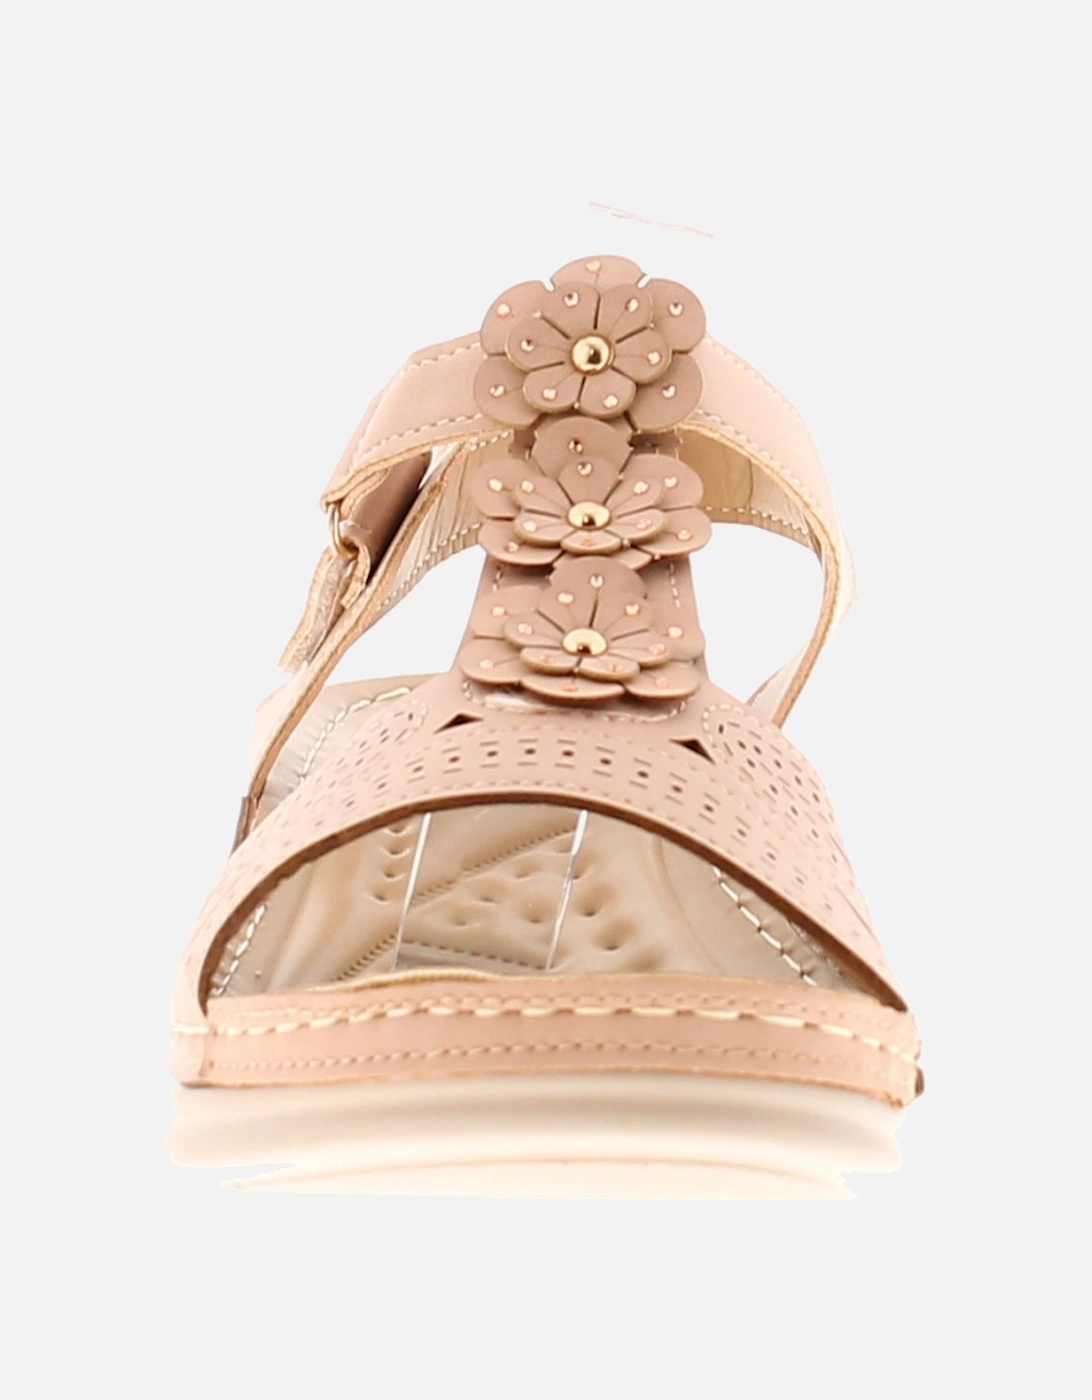 Womens Flat Sandals Daisy Touch Fastening nude pink UK Size